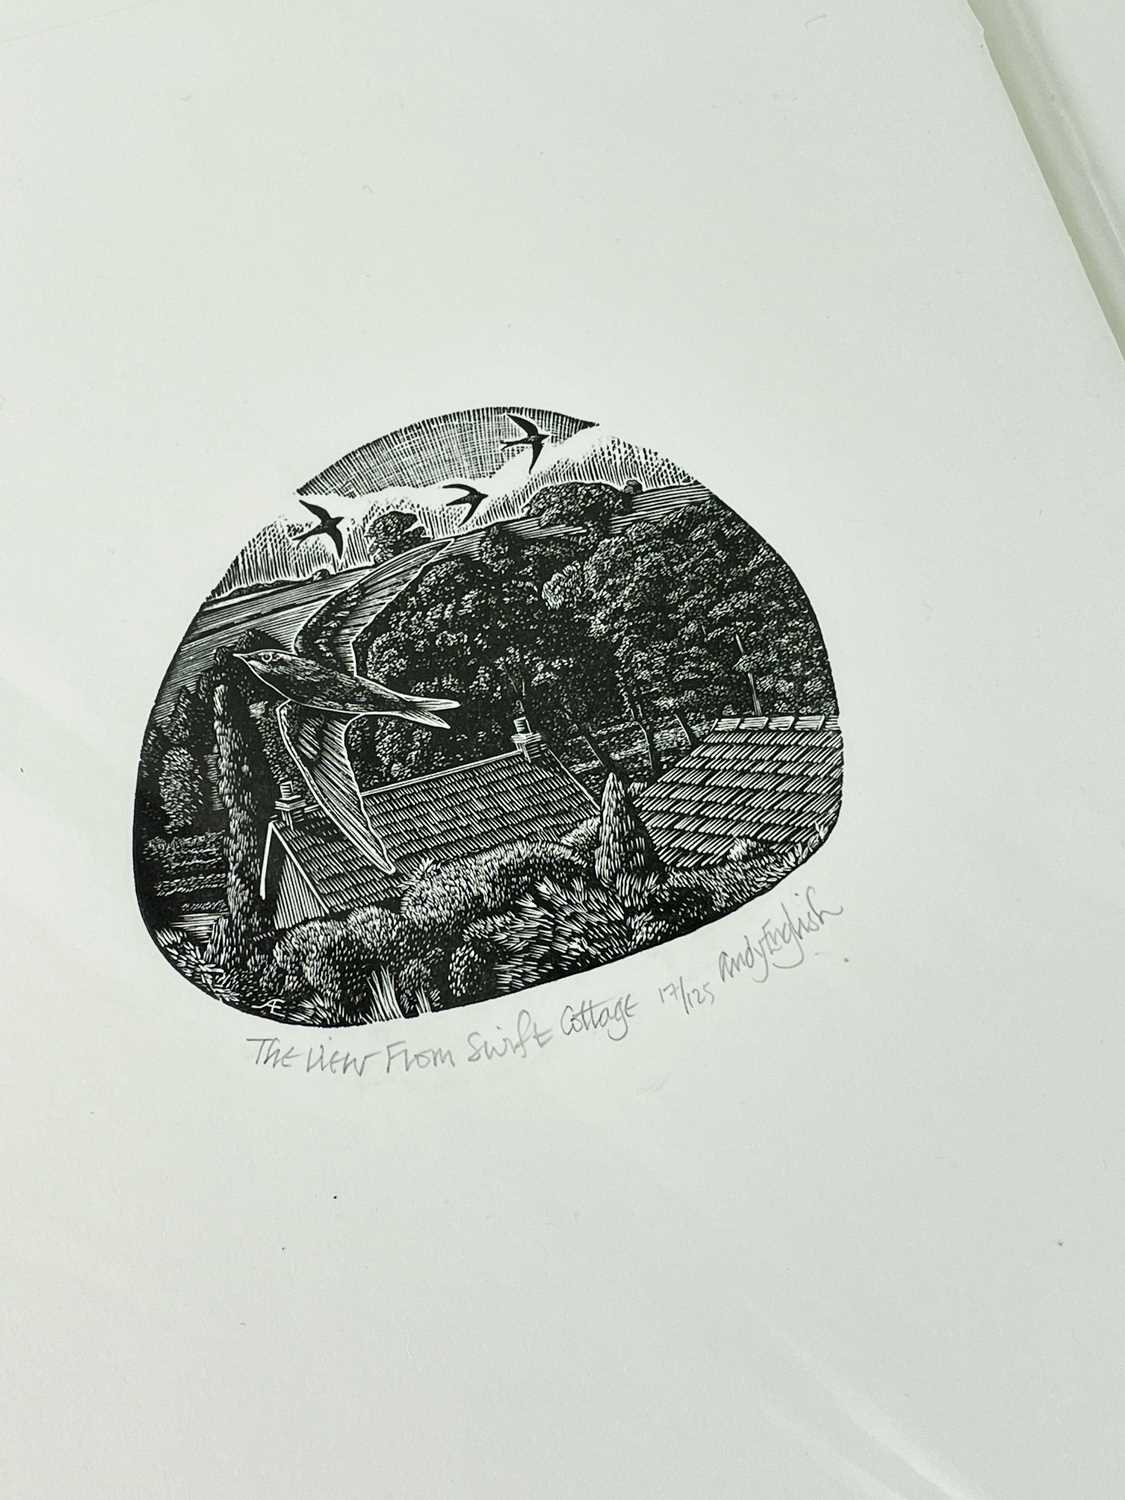 ‡ AFTER ANDY ENGLISH nine limited edition monochrome prints - 'Myth of the Magpie?' 4/125, (I) 17. - Image 10 of 10